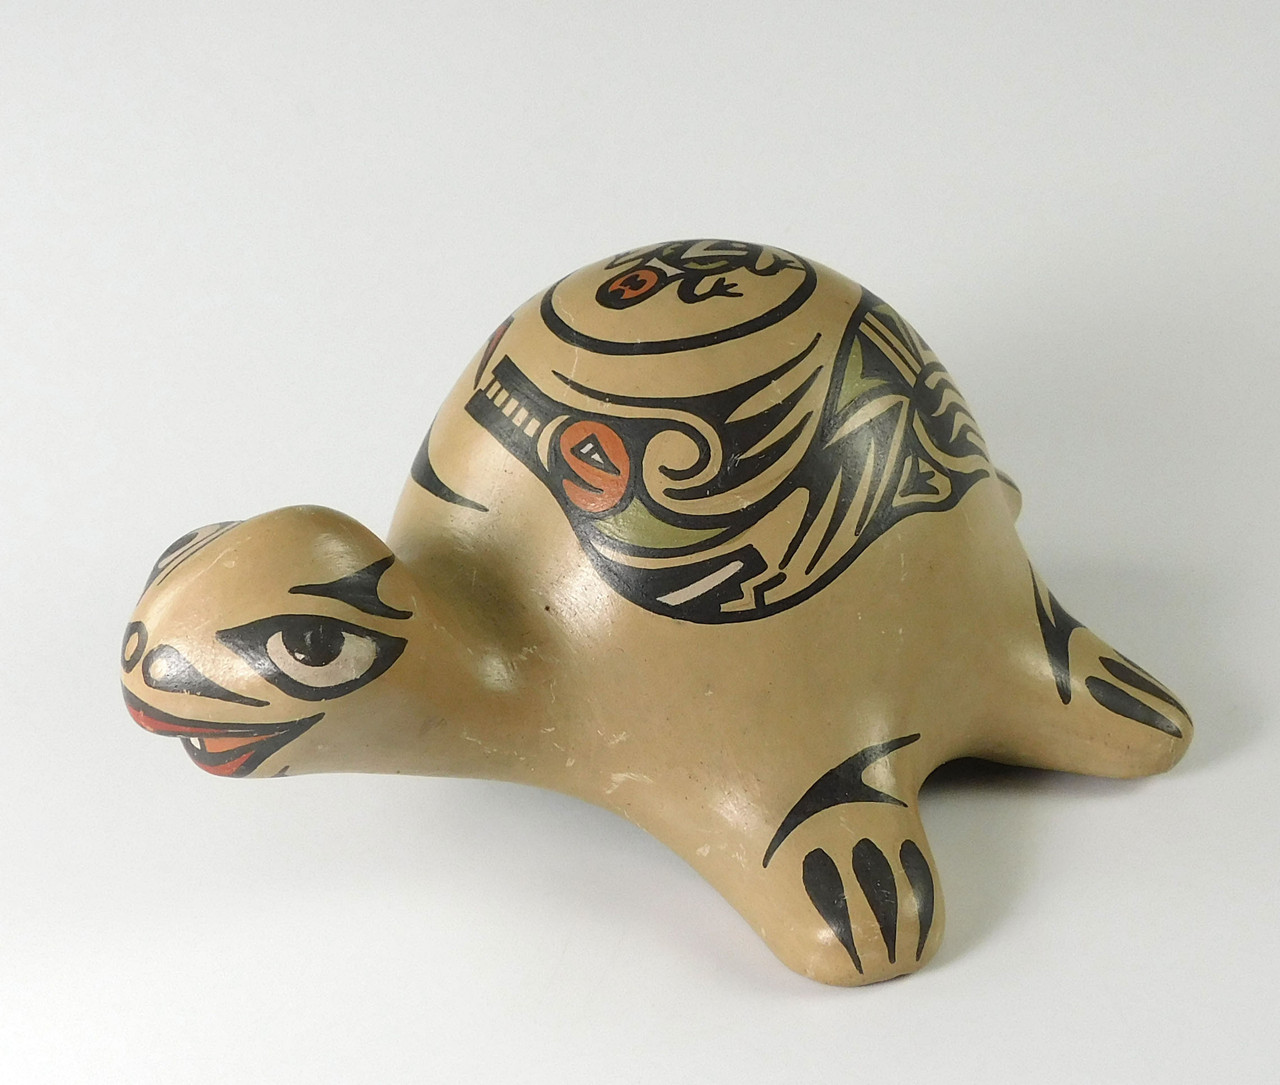 Paint Your Own - Stone Turtle – Foothill Mercantile